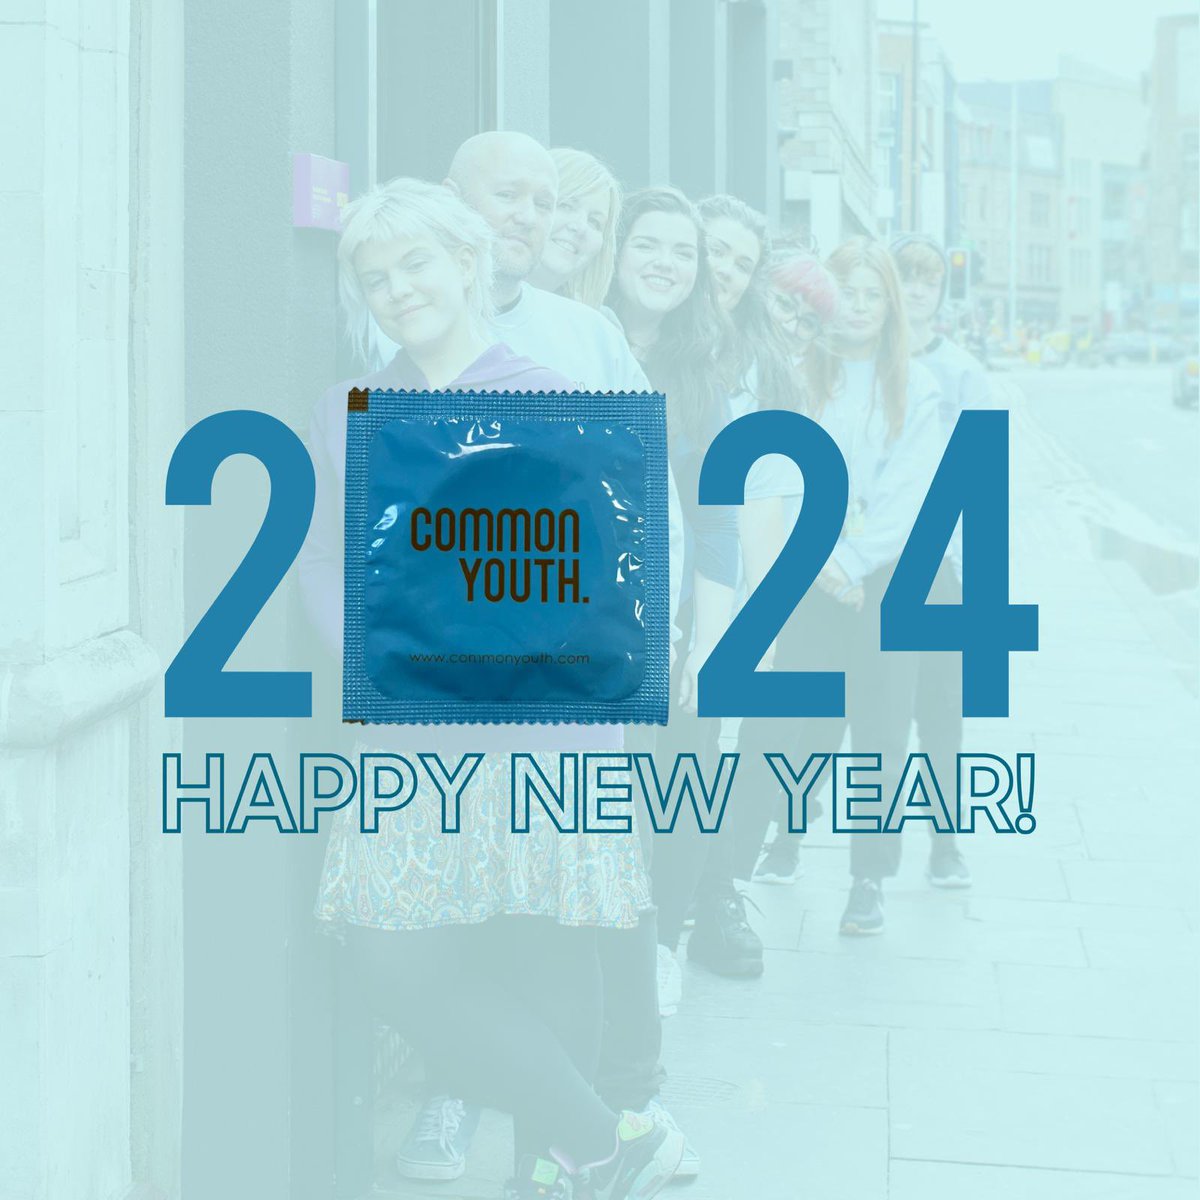 Happy New Year from the Common Youth team!💜

You be you, and we’ll be here.

BELFAST CLINIC 028 9032 8866
COLERAINE CLINIC 028 7034 2178

#commonyouth #sexualhealth #freeadvice #wellbeing #education #educatingyouth #happynewyear